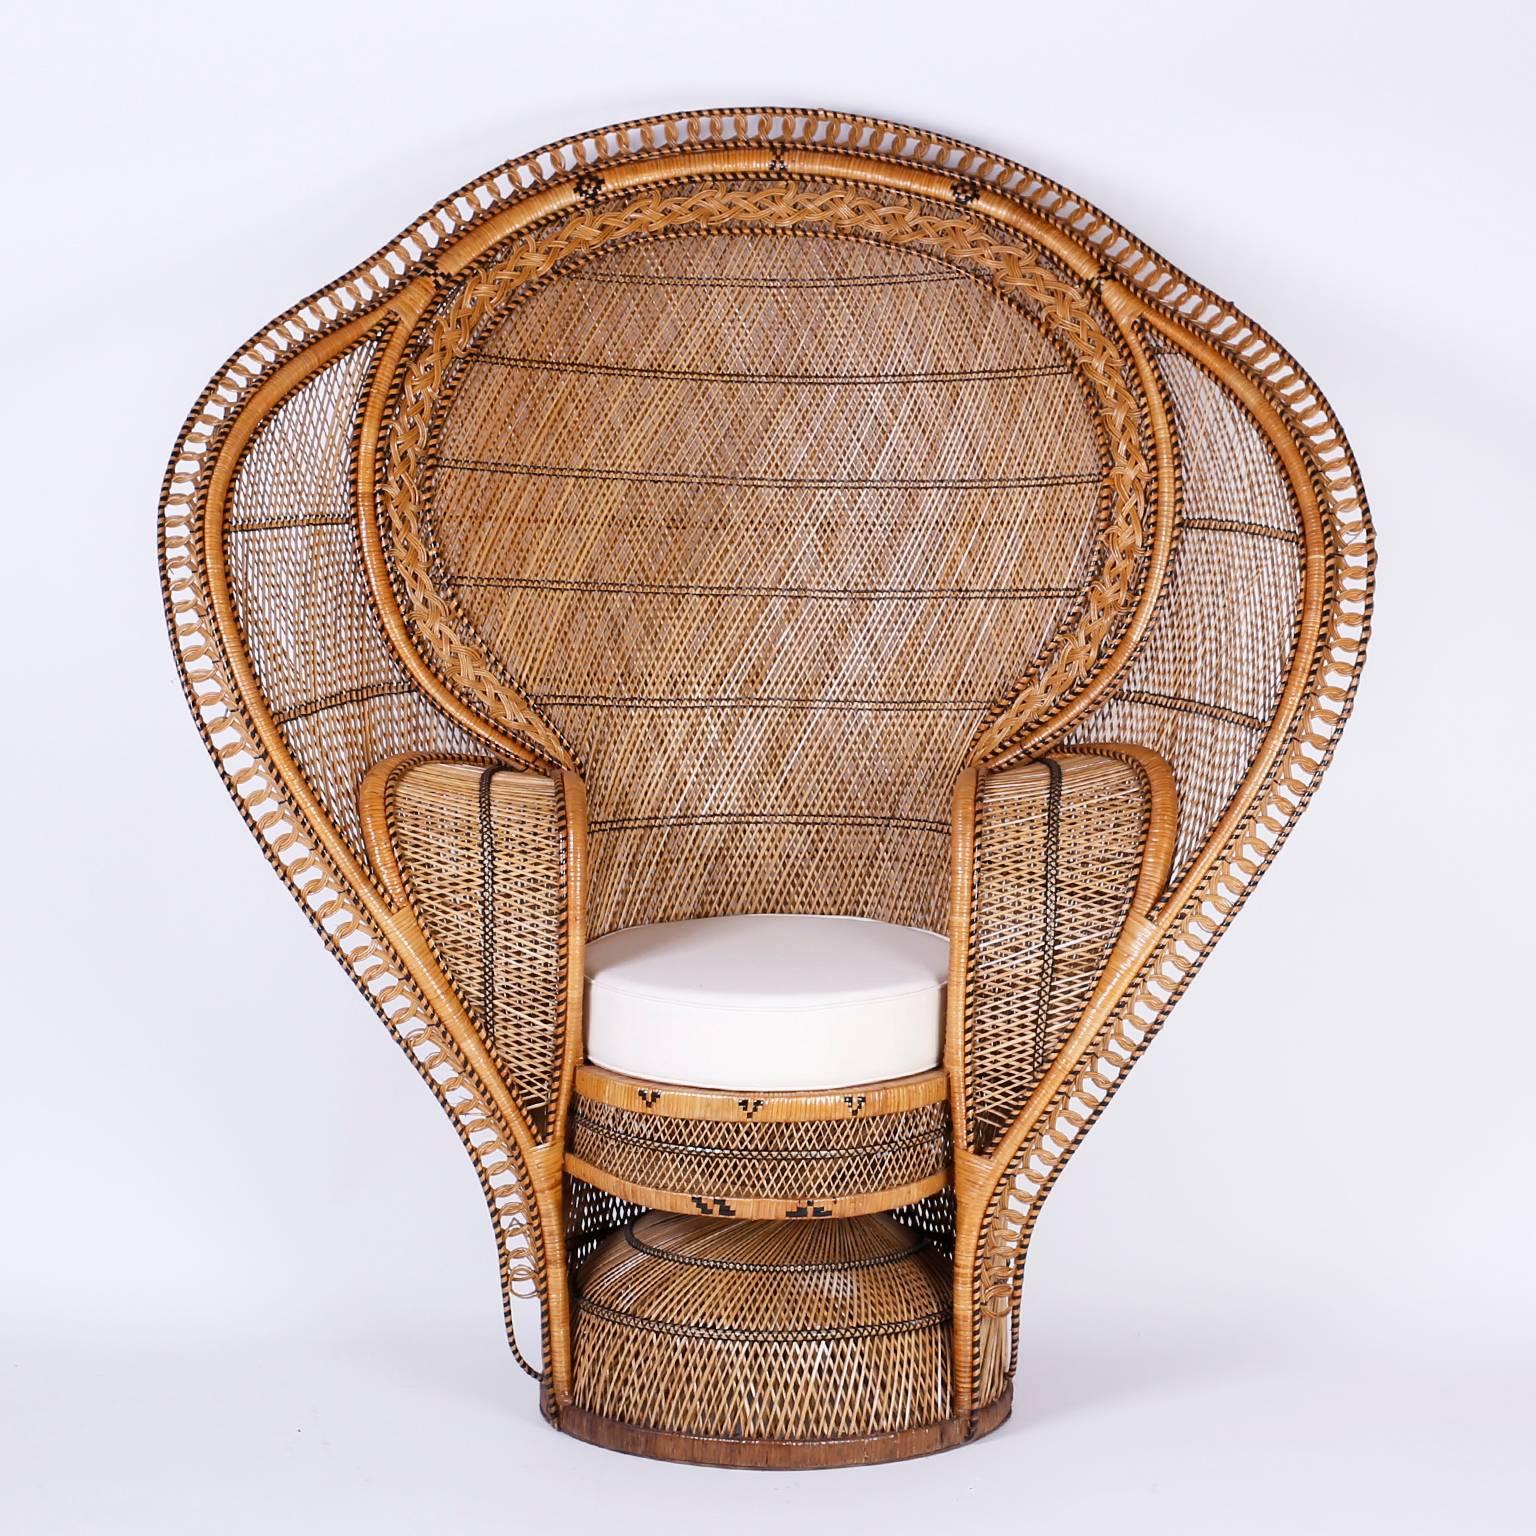 Pair of peacock chairs or cobra chairs with an unusual, dramatic form reminiscent of a cobra. Constructed with rattan, woven for strength and style in an ambitious combination of designs that make these chairs best of the genre.

Seat height